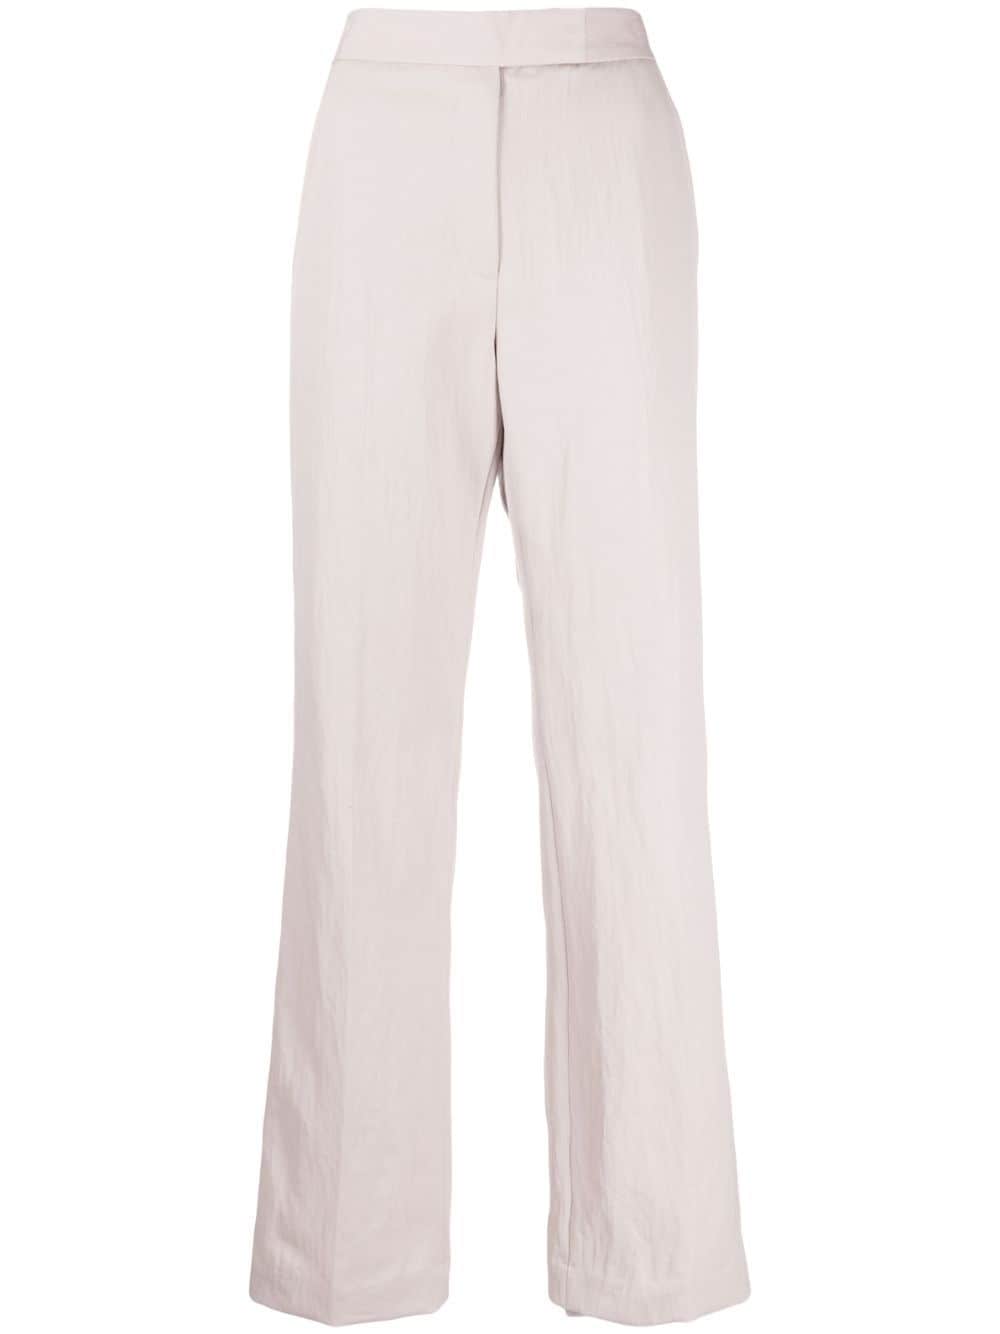 3.1 Phillip Lim / フィリップ リム High-waist Tailored Trousers In Smoke Grey